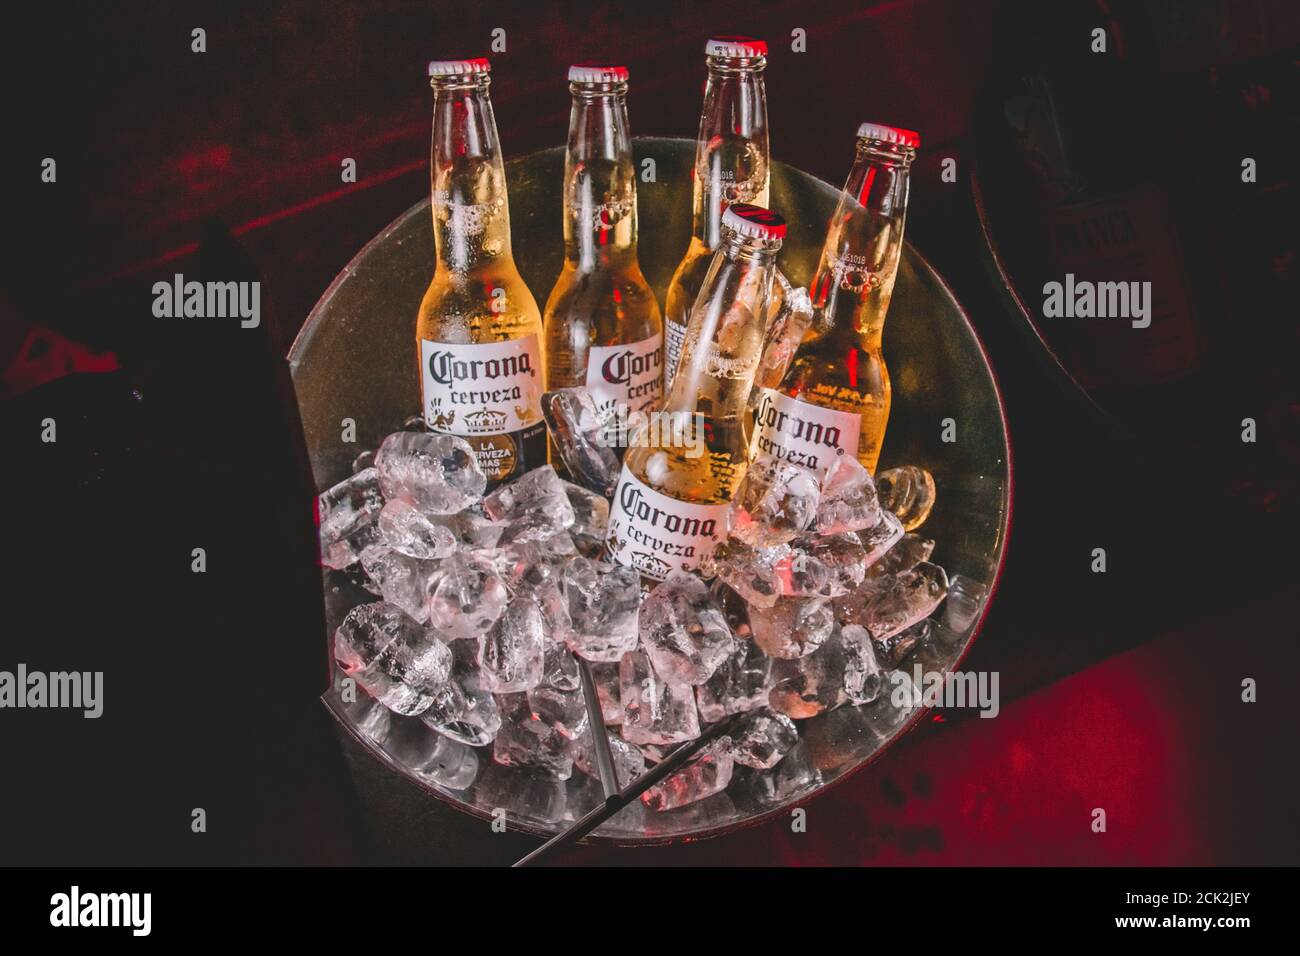 Buenos Aires, Argentina; January 14, 2018: Five bottles of Corona beers in a bowl with ice Stock Photo